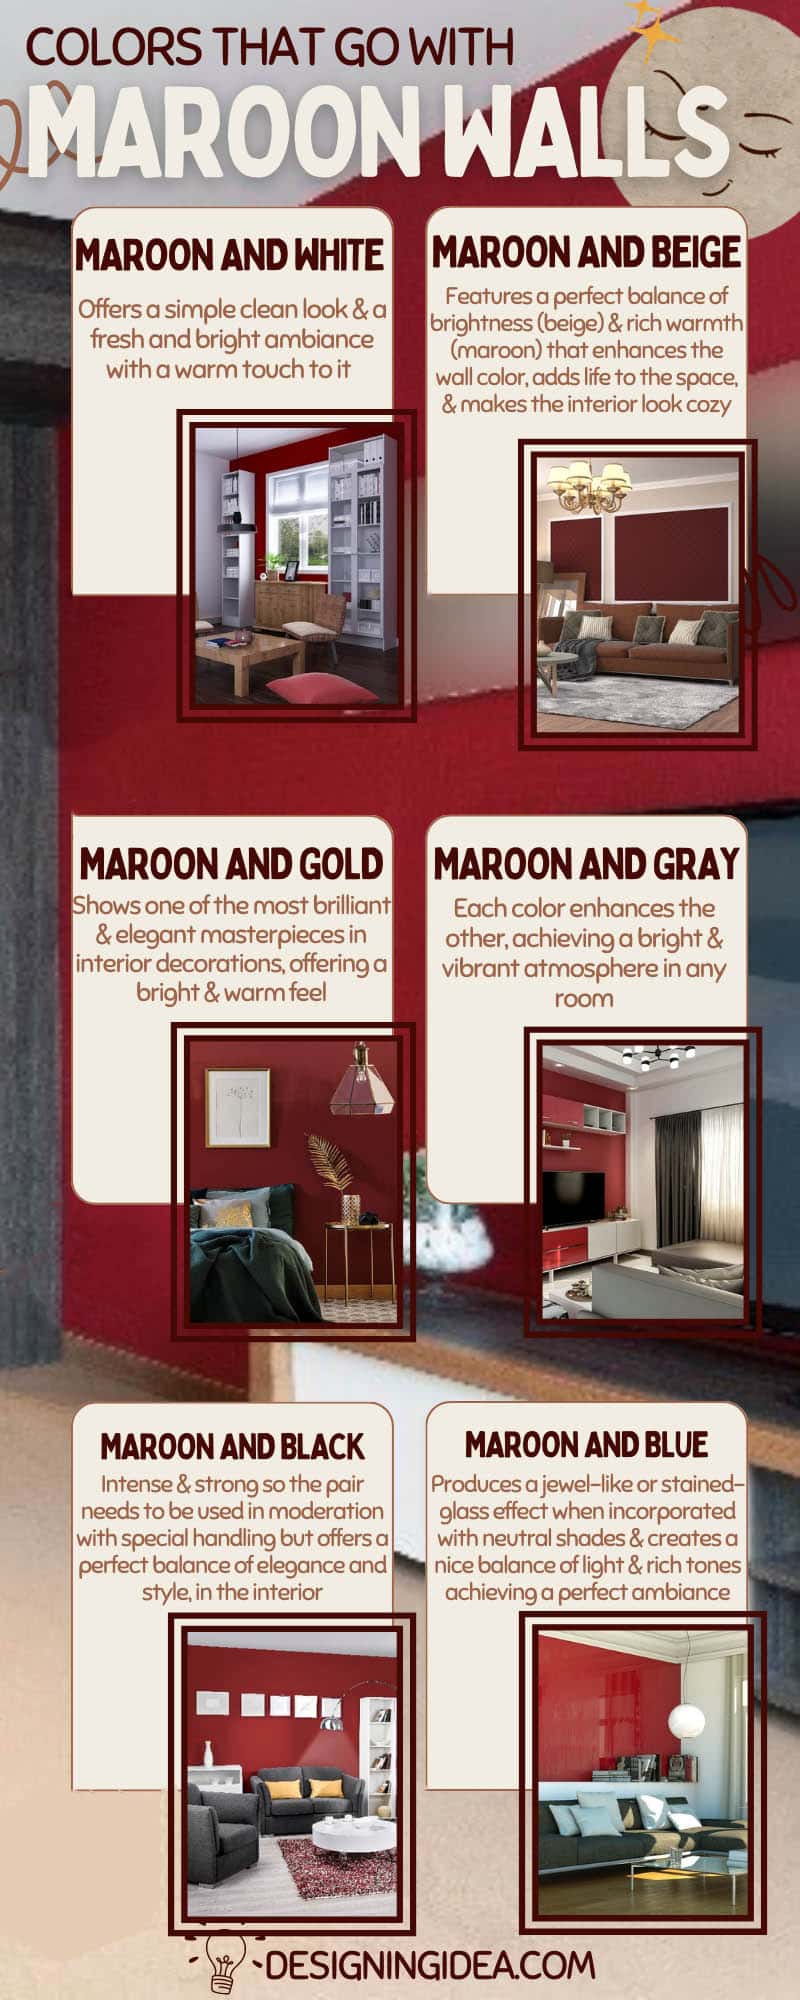 Colors that go with maroon hued walls infographic